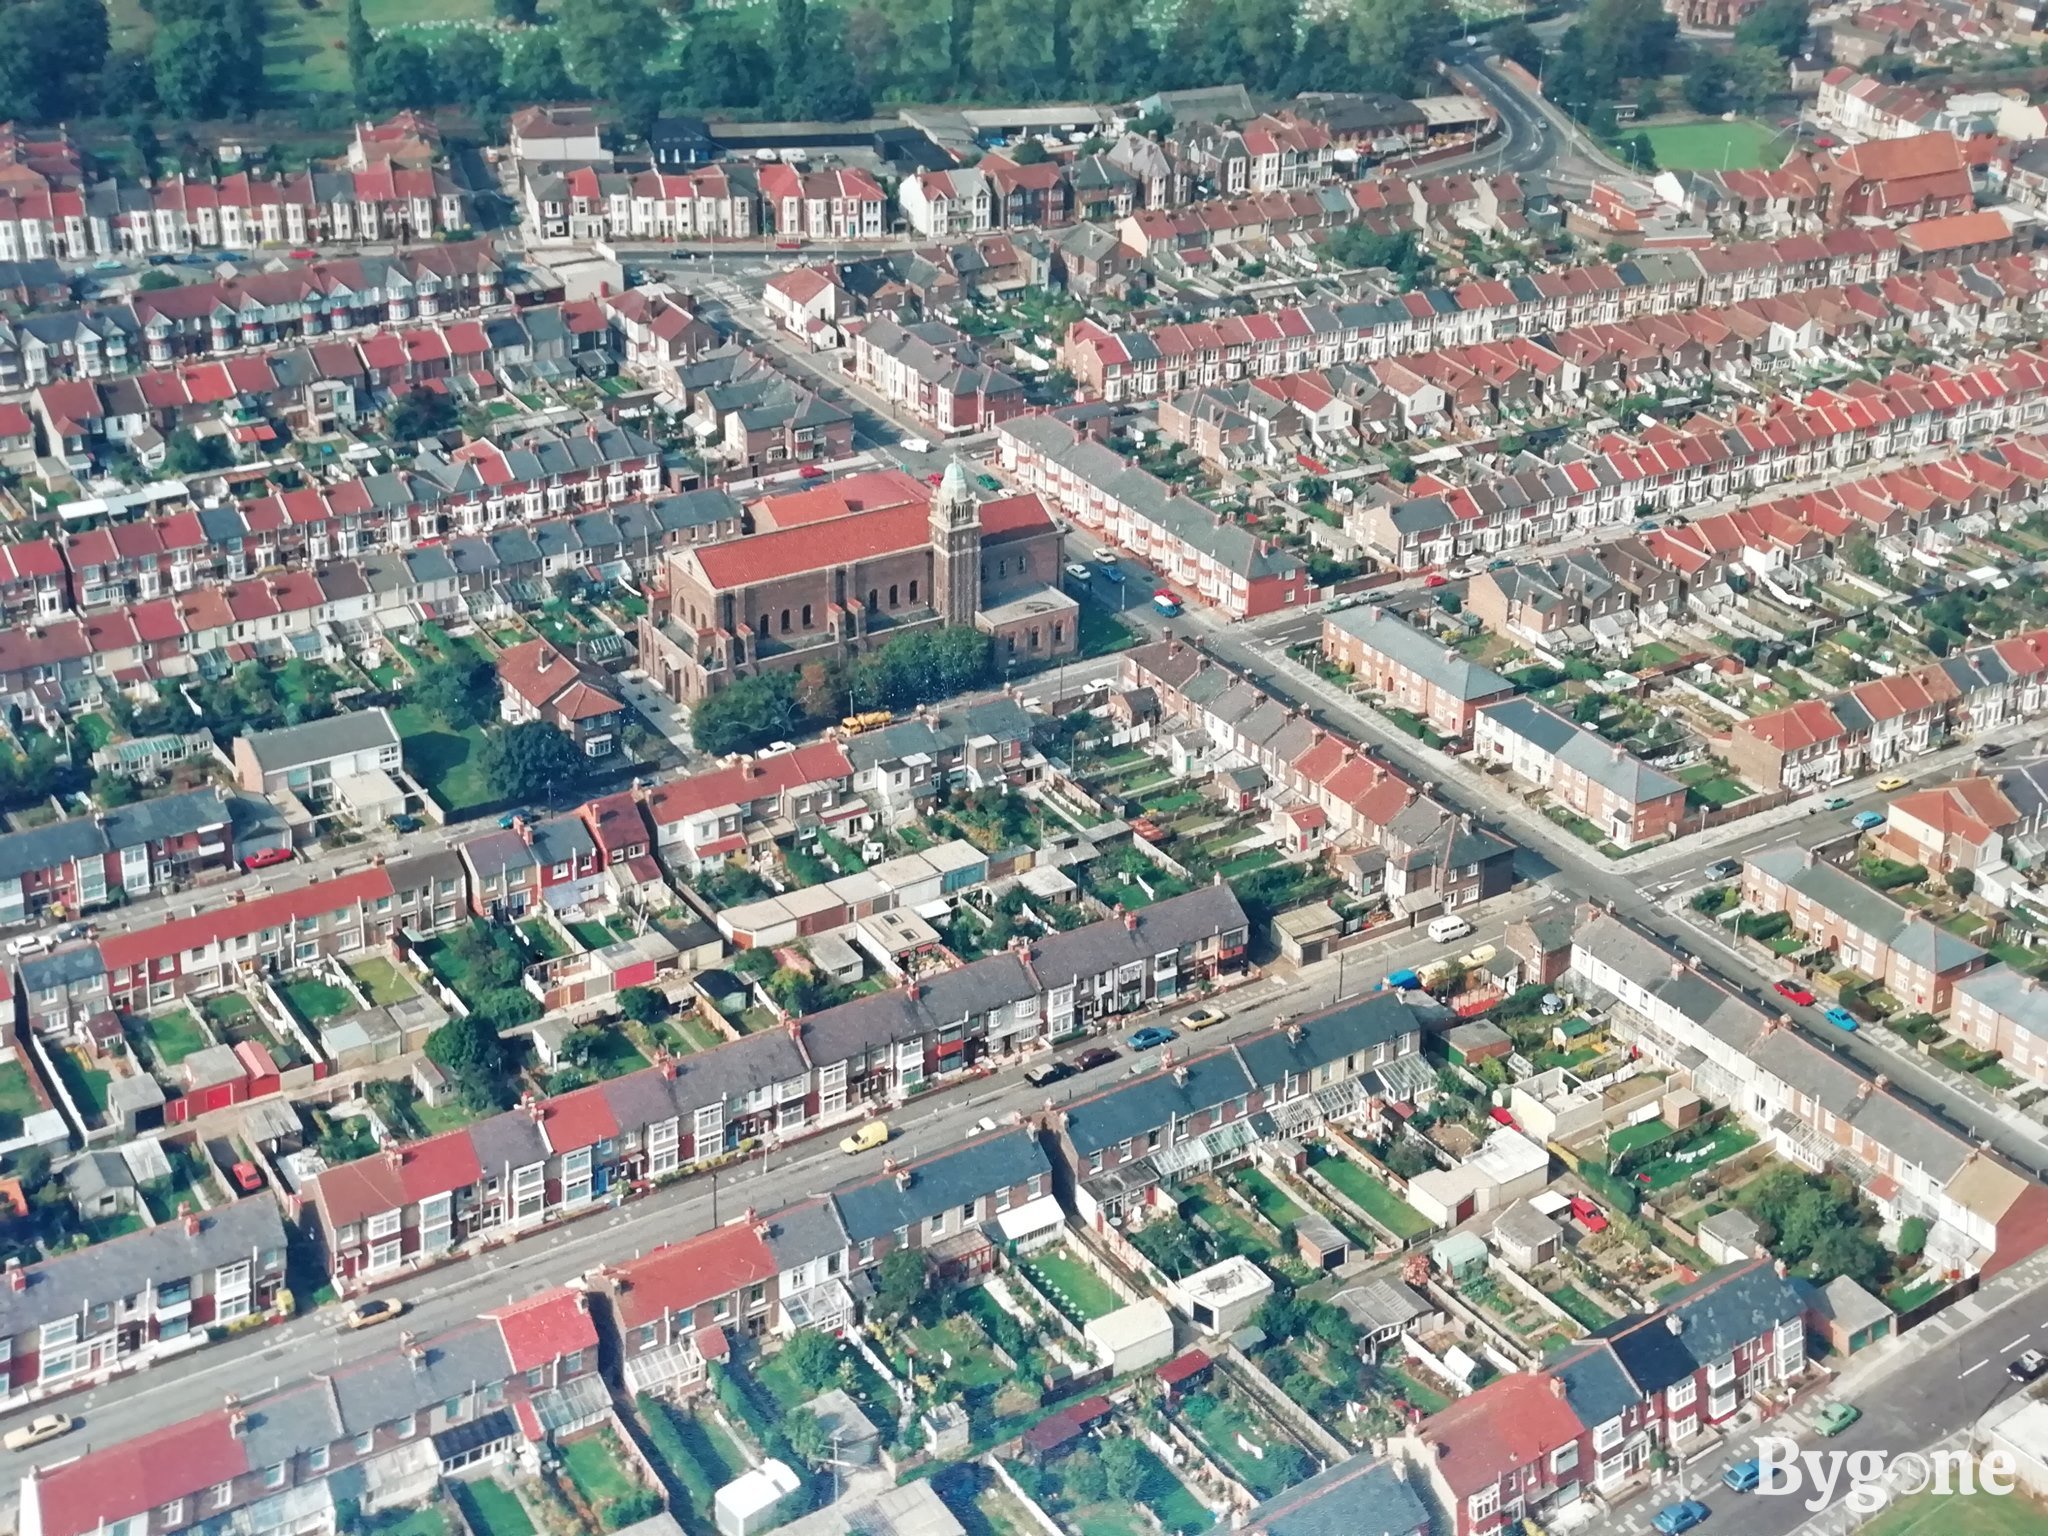 Aerial view of Baffins, 1980s